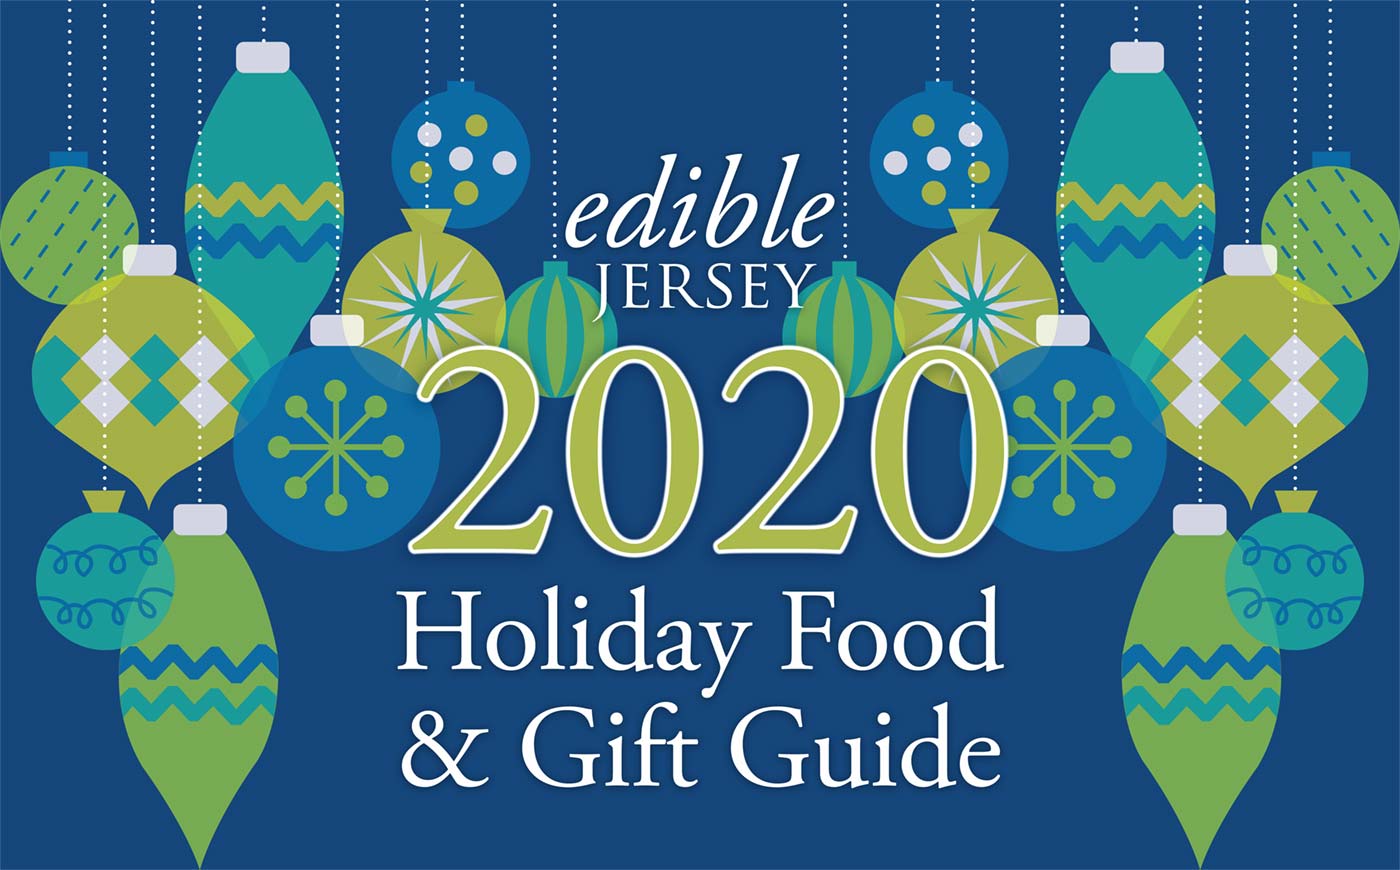 edible Jersey's 2020 Holiday Gift Guide